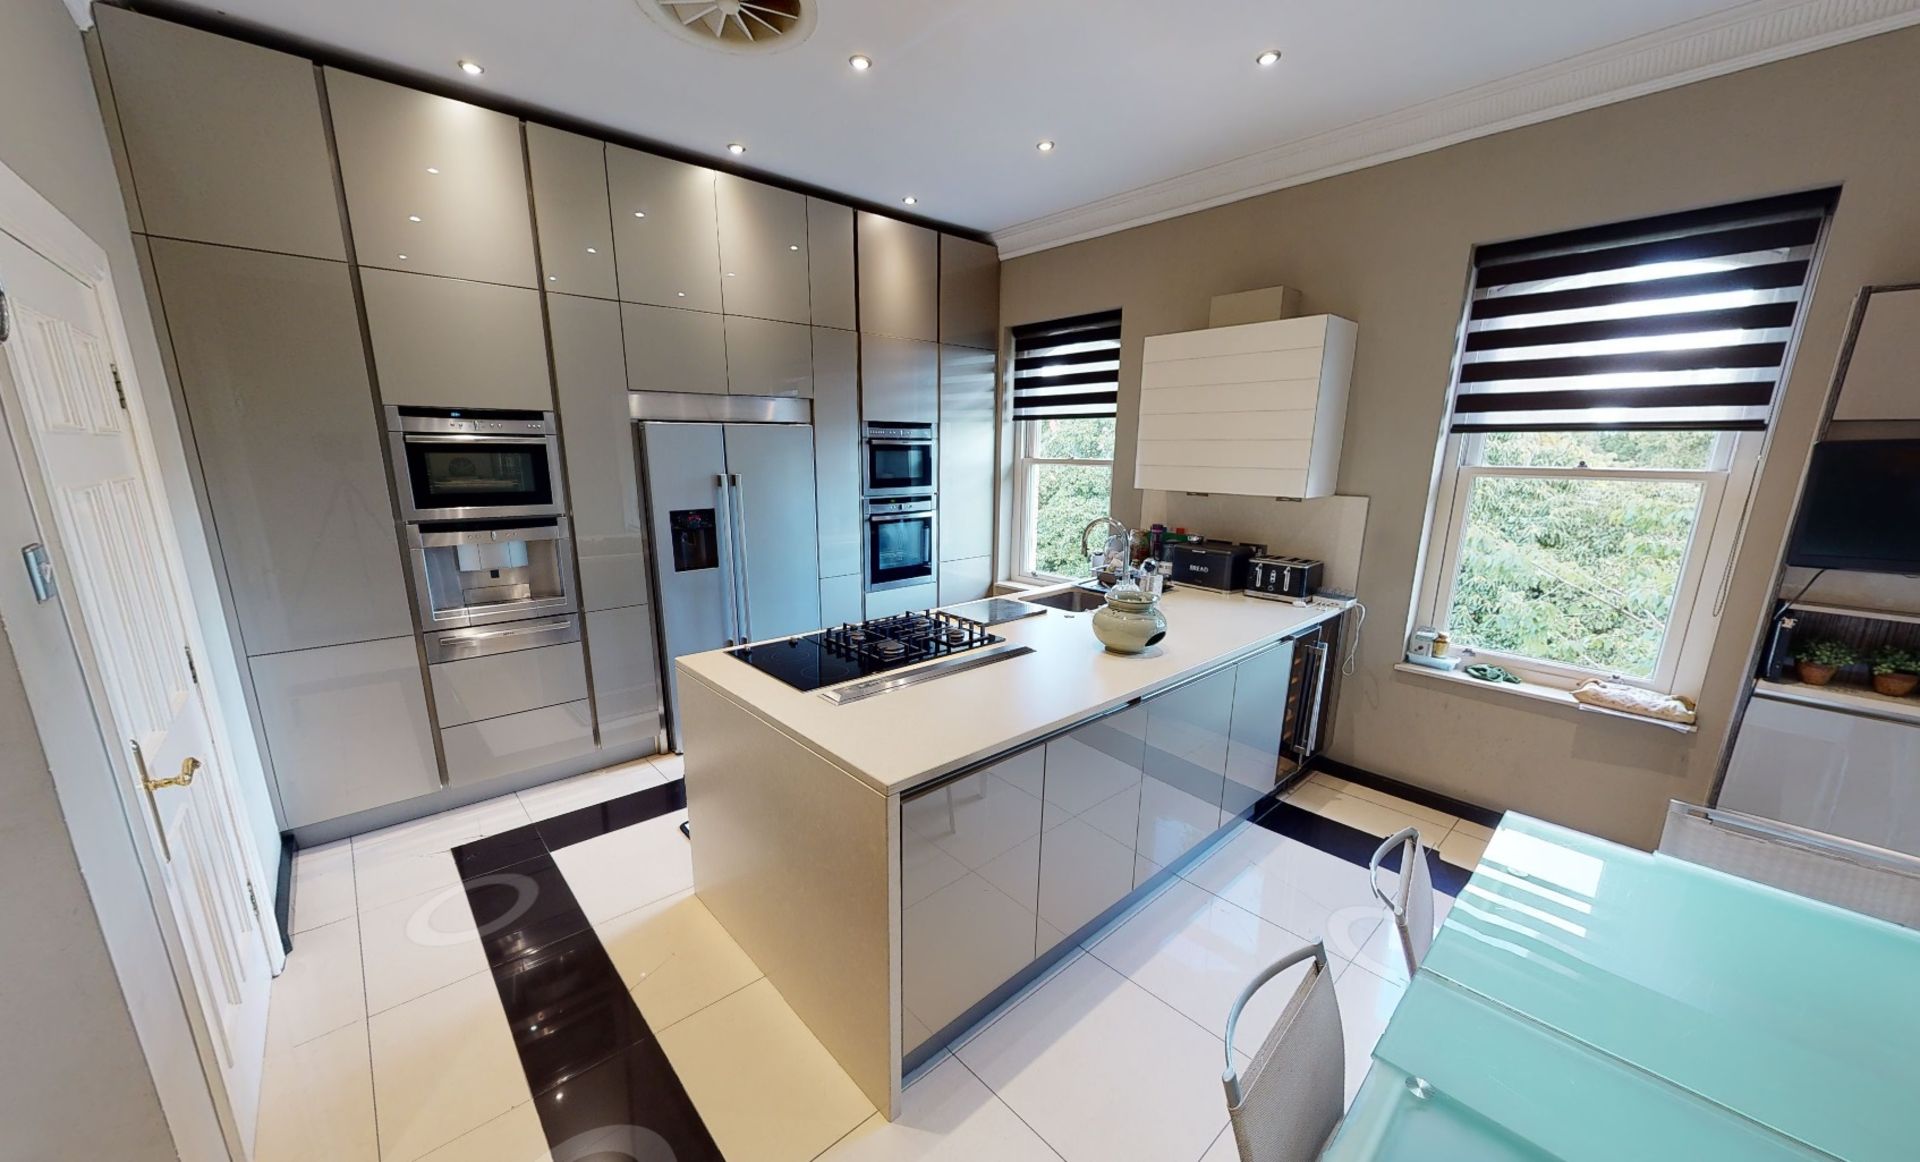 1 x Contemporary Bespoke Fitted Kitchen With Integrated Neff Branded Appliances To be removed from a